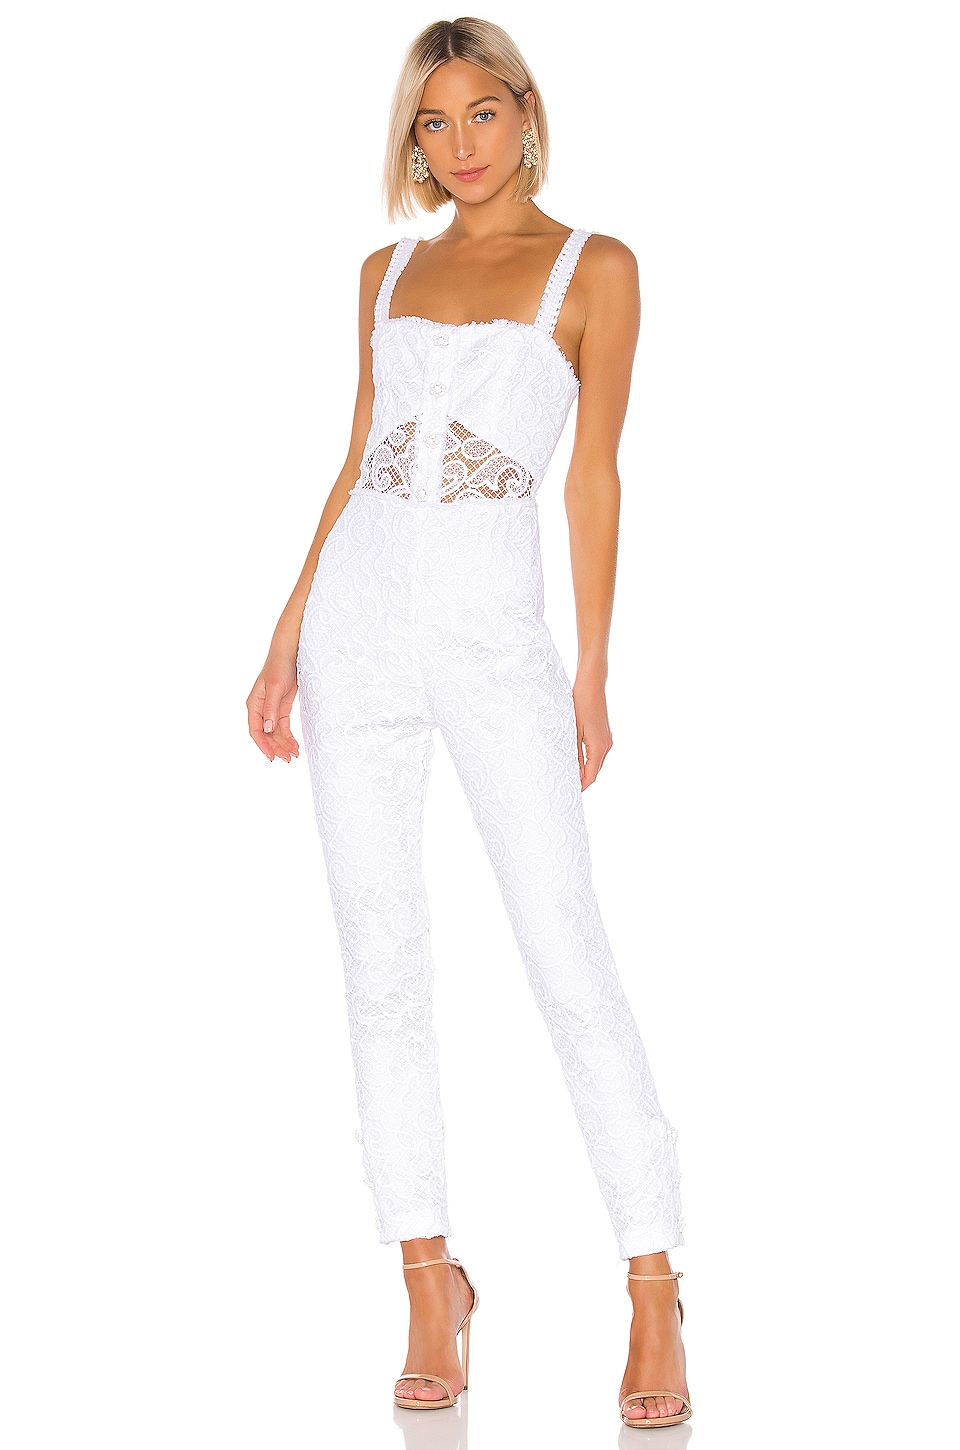 ALEXIS ALEXIS GOVADA JUMPSUIT IN WHITE.,AXIS-WC19